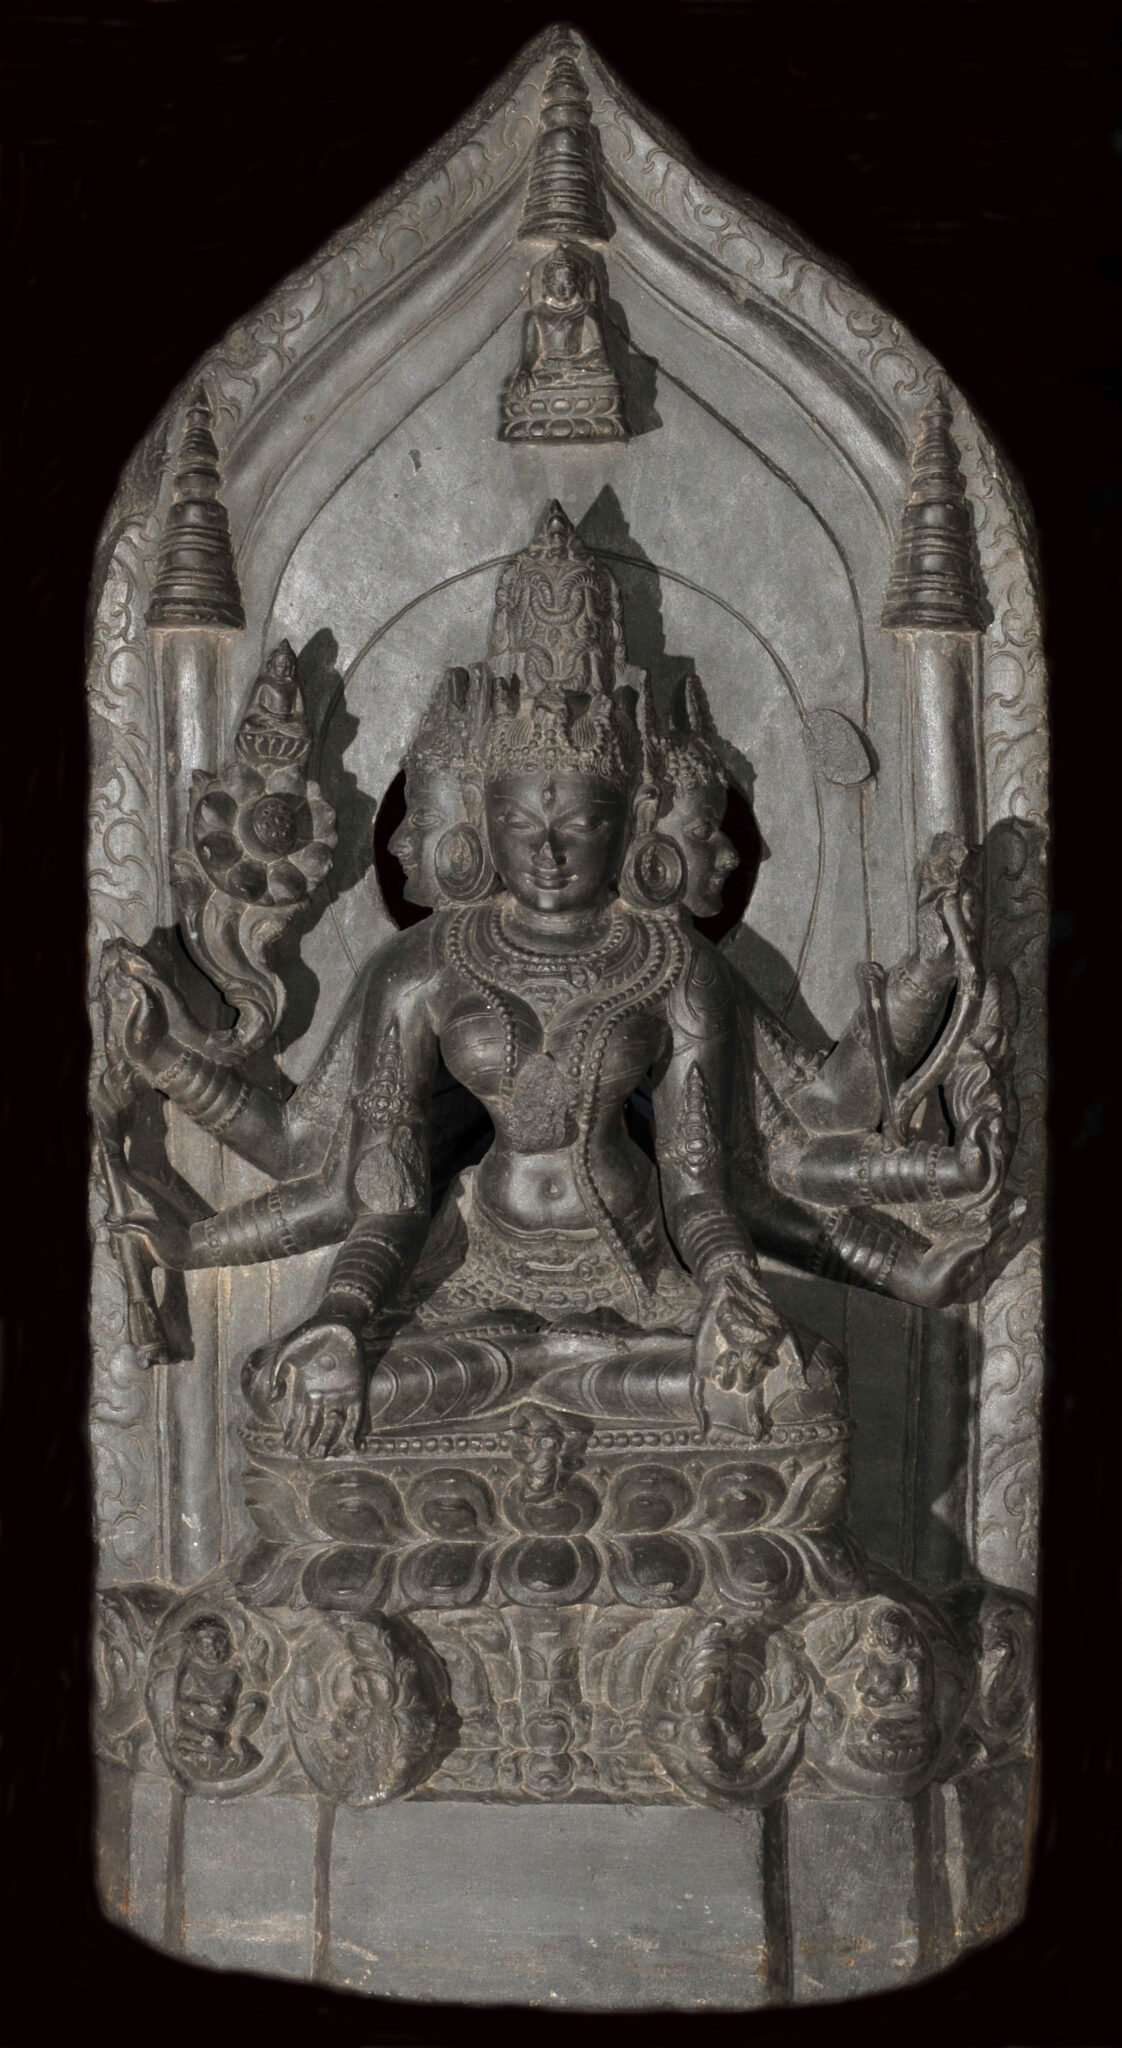 Finely carved gray relief sculpture depicting three-faced, many-armed deity holding symbolic implements before pointed nimbus